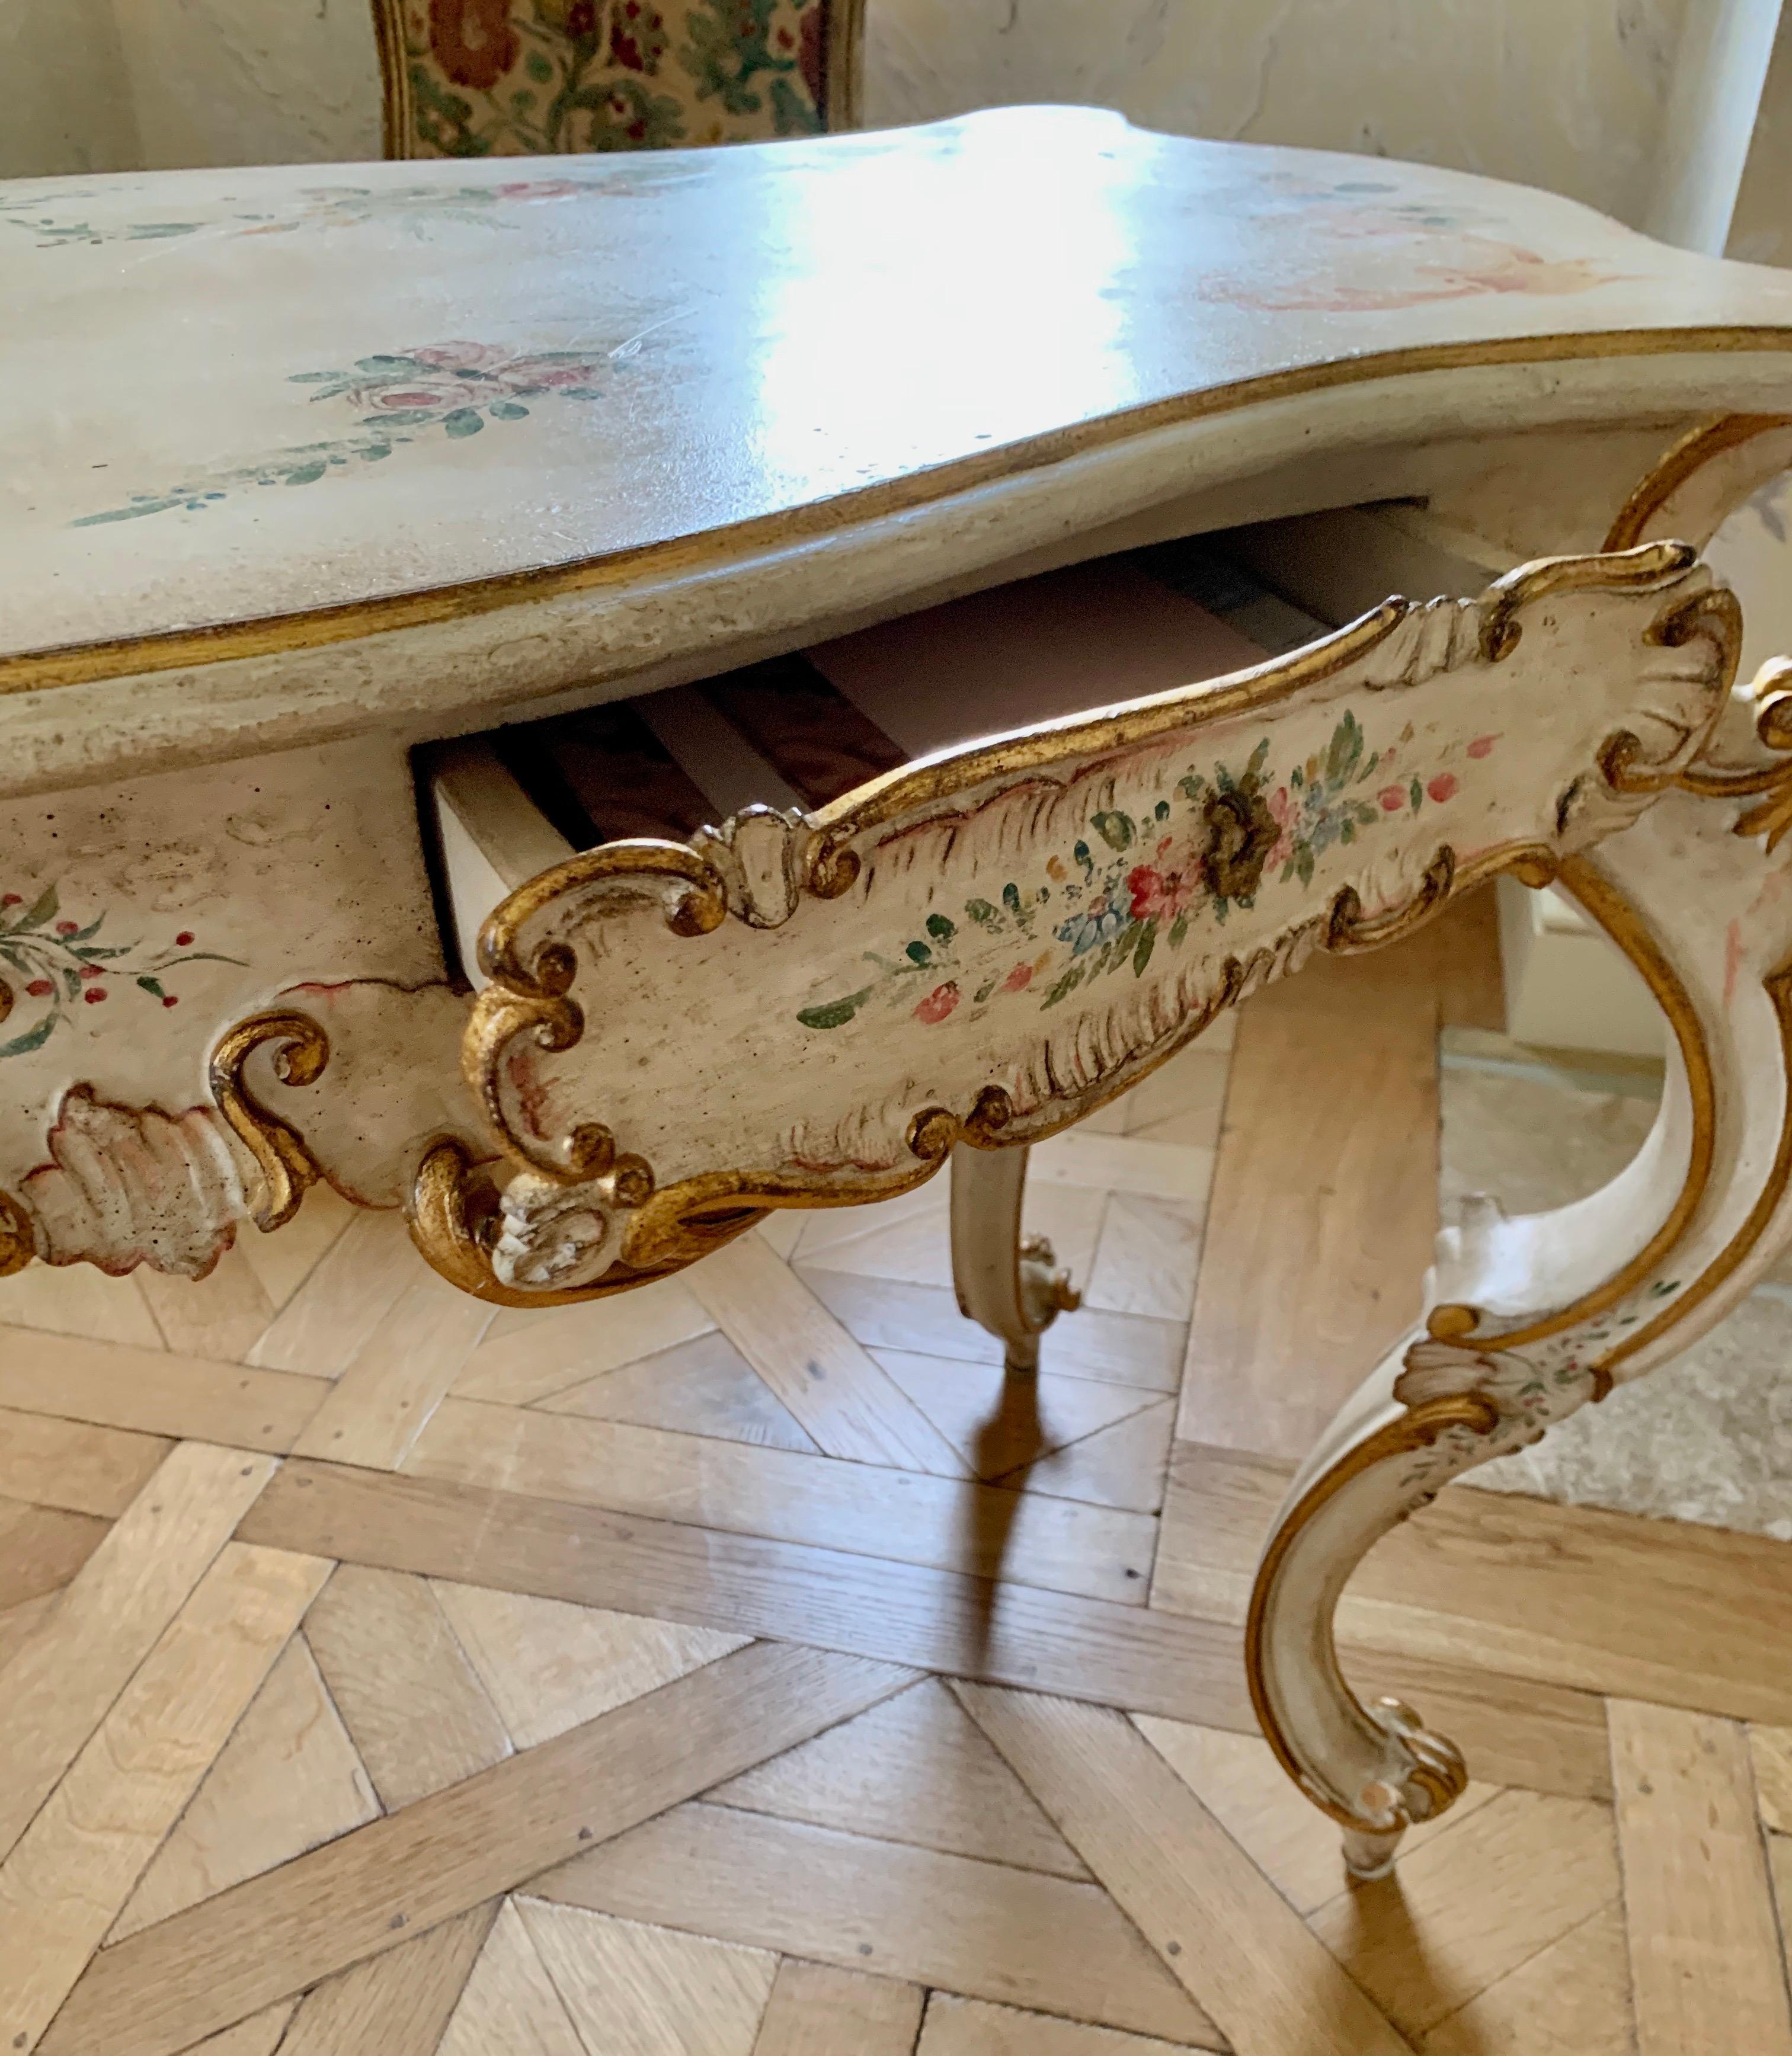 Exquisite hand painted ladies Venetian writing desk or dressing table with gold gilt carved scrollwork and hand painted floral motifs on all four sides. Desk has two drawers and one cabinet.